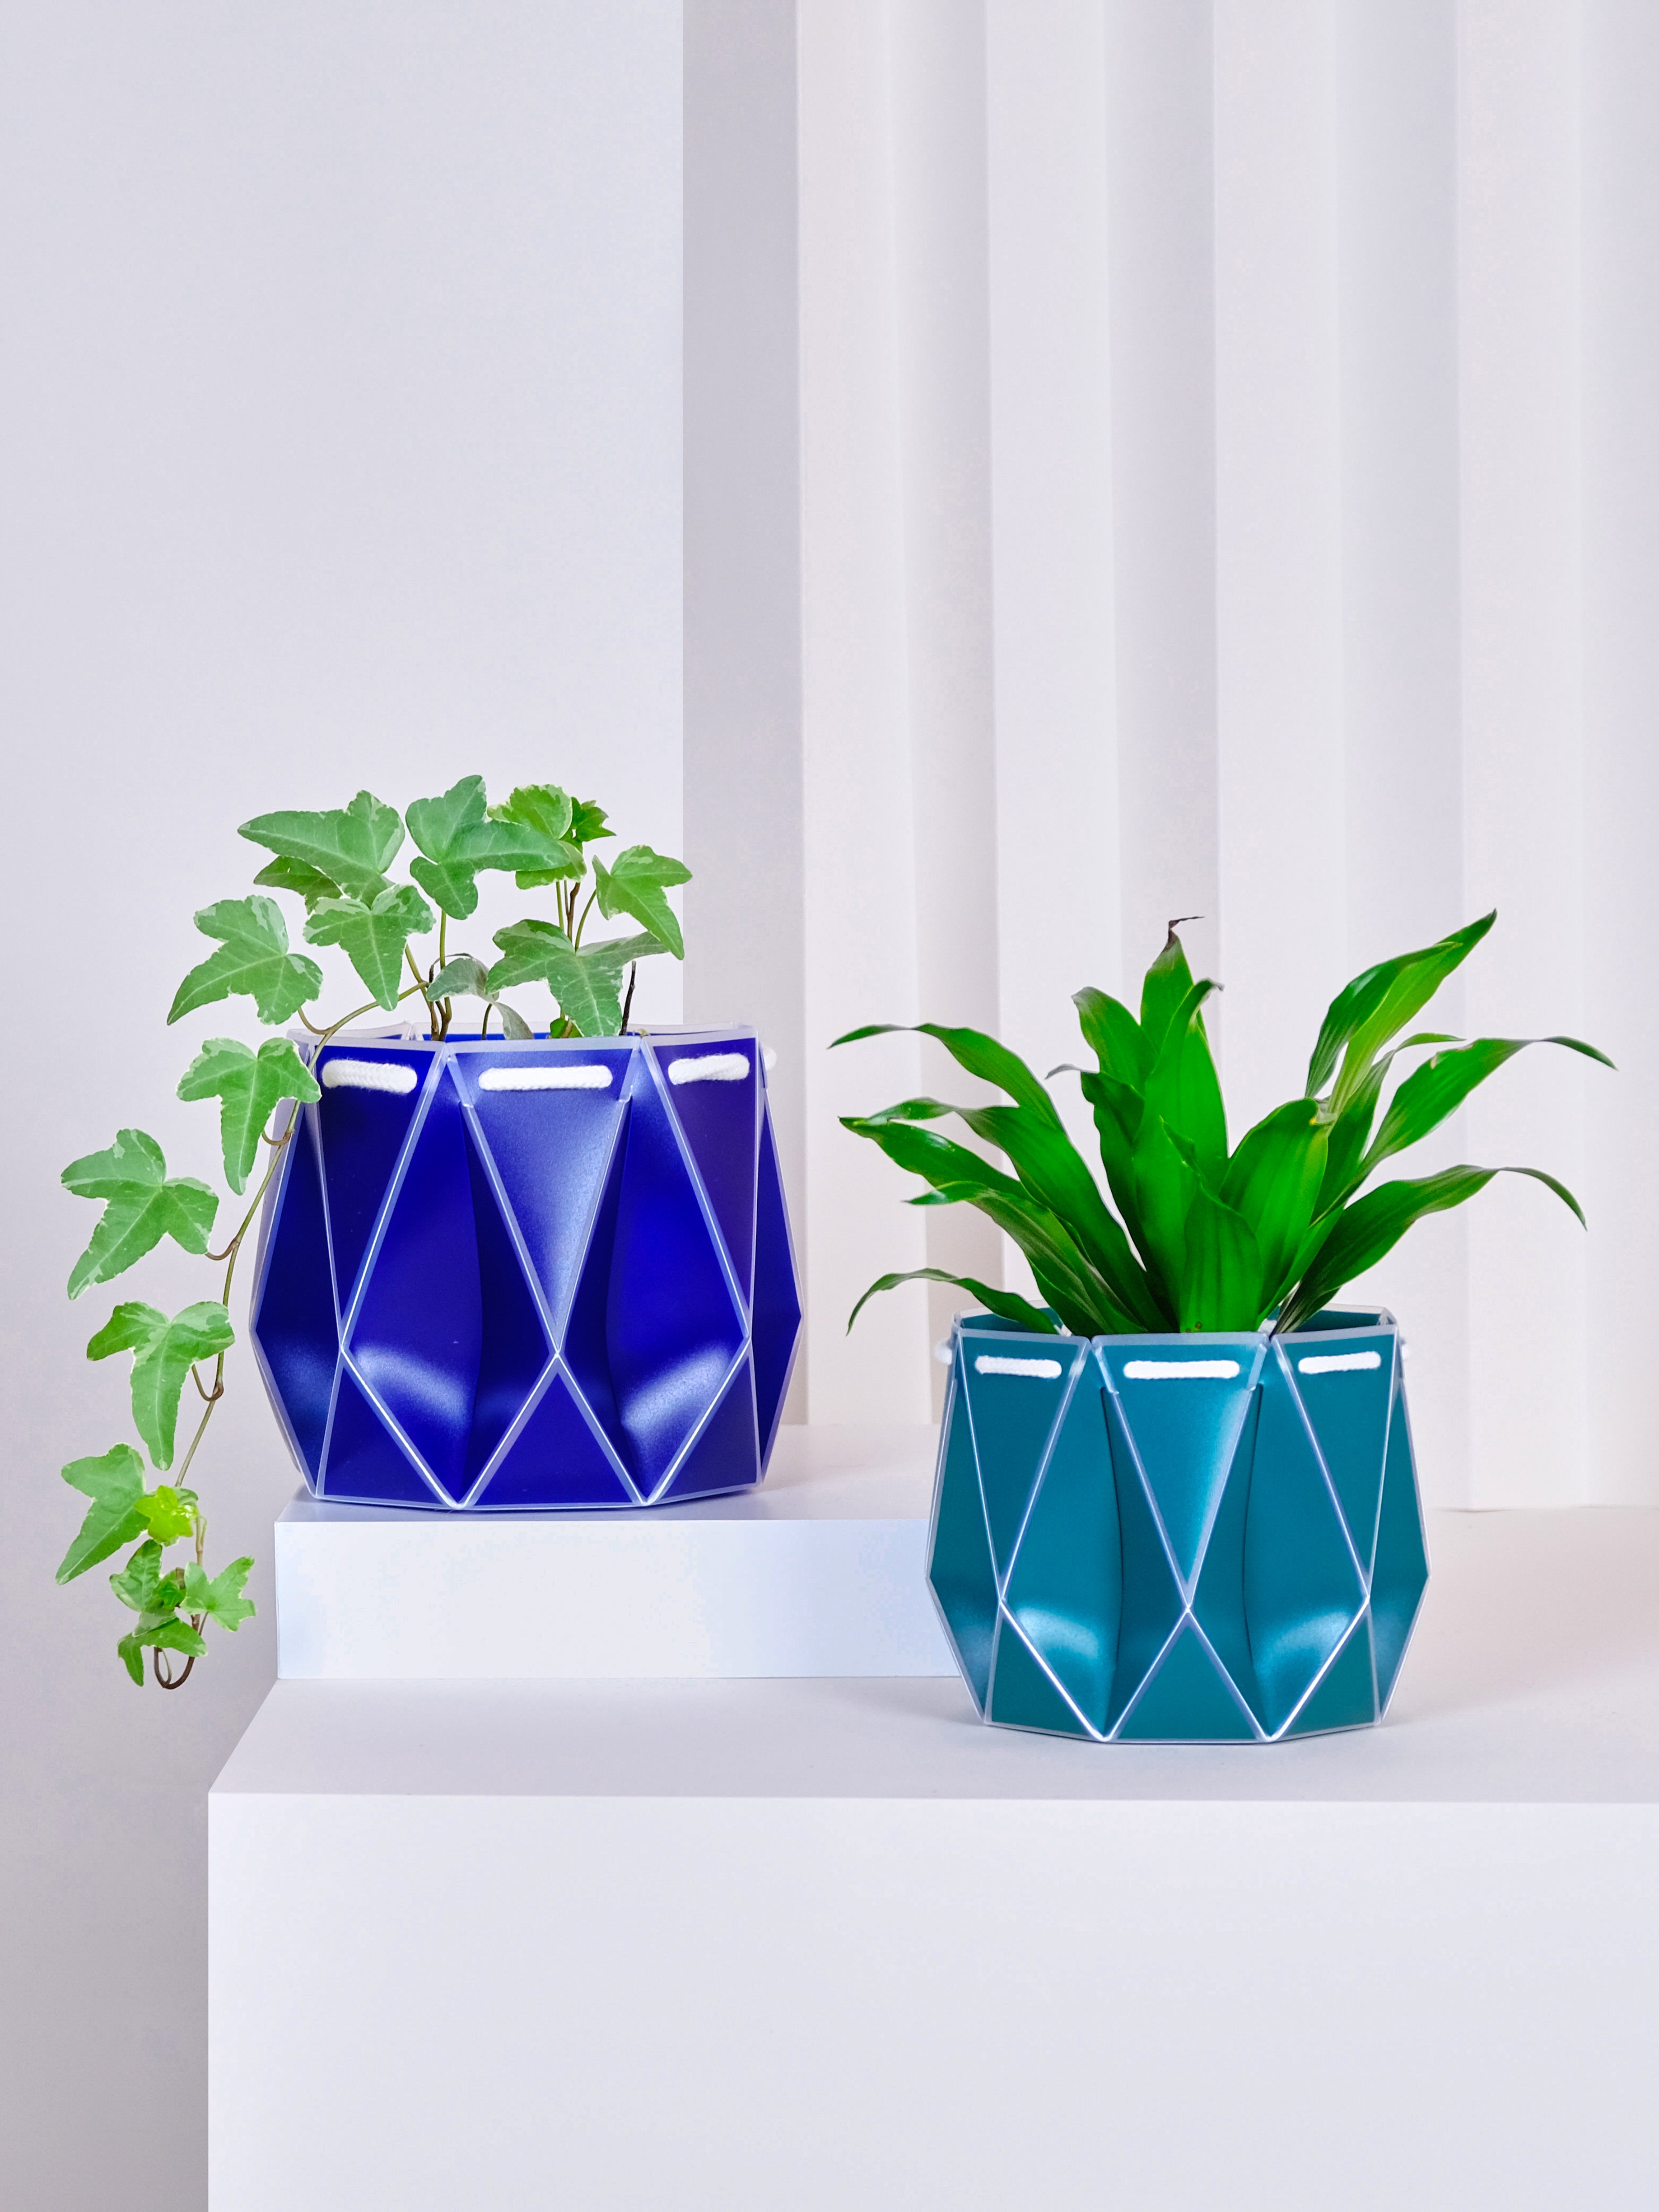 Navy blue and teal origami plant pots made from recycled plastic. Eco sustainable design used to self-water your plants.